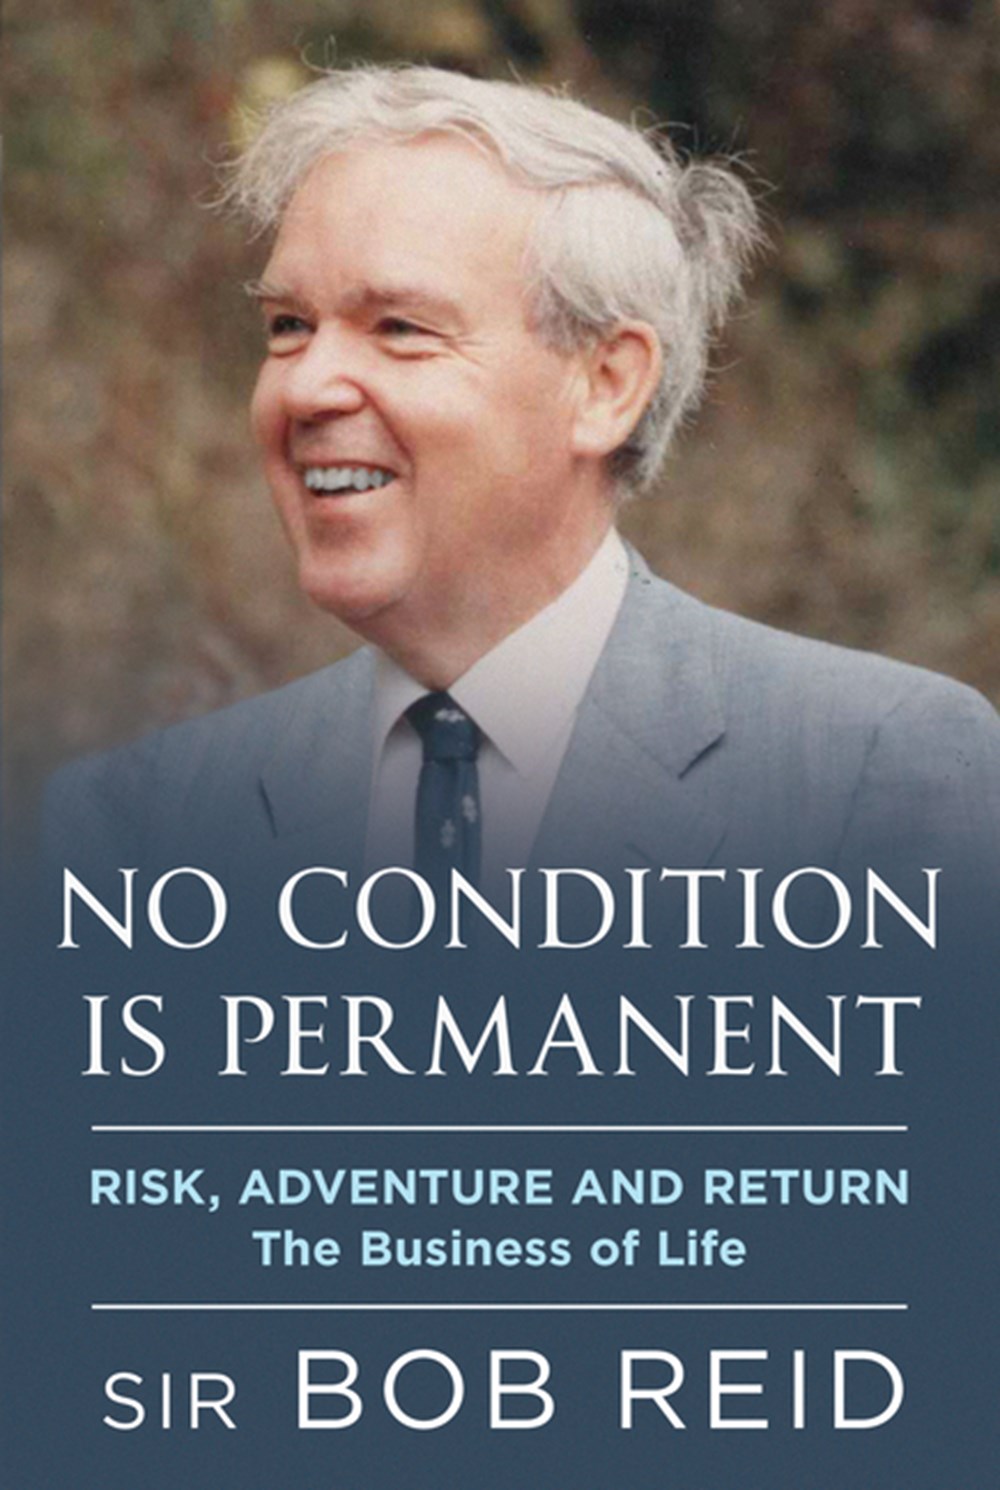 No Condition Is Permanent Risk, Adventure and Return: The Business of Life